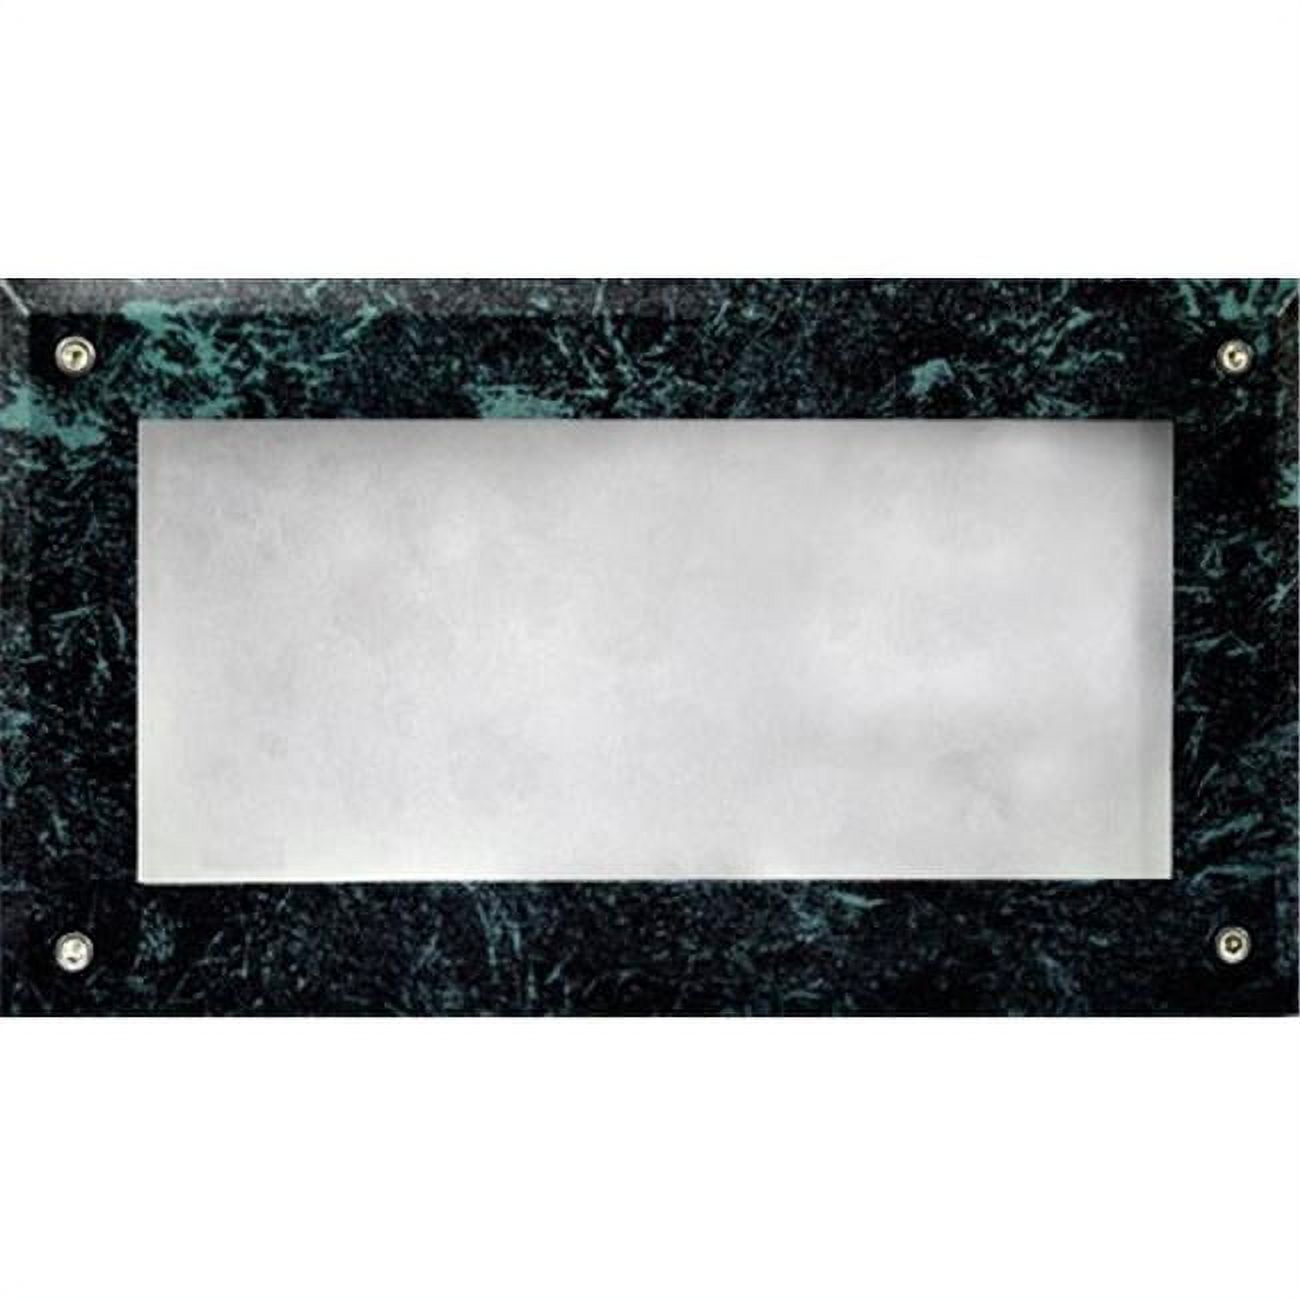 Picture of Dabmar Lighting DSL1013-VG Recessed Open Face Brick, Step & Wall Light, Verde Green - 5 x 8.90 x 3.15 in.